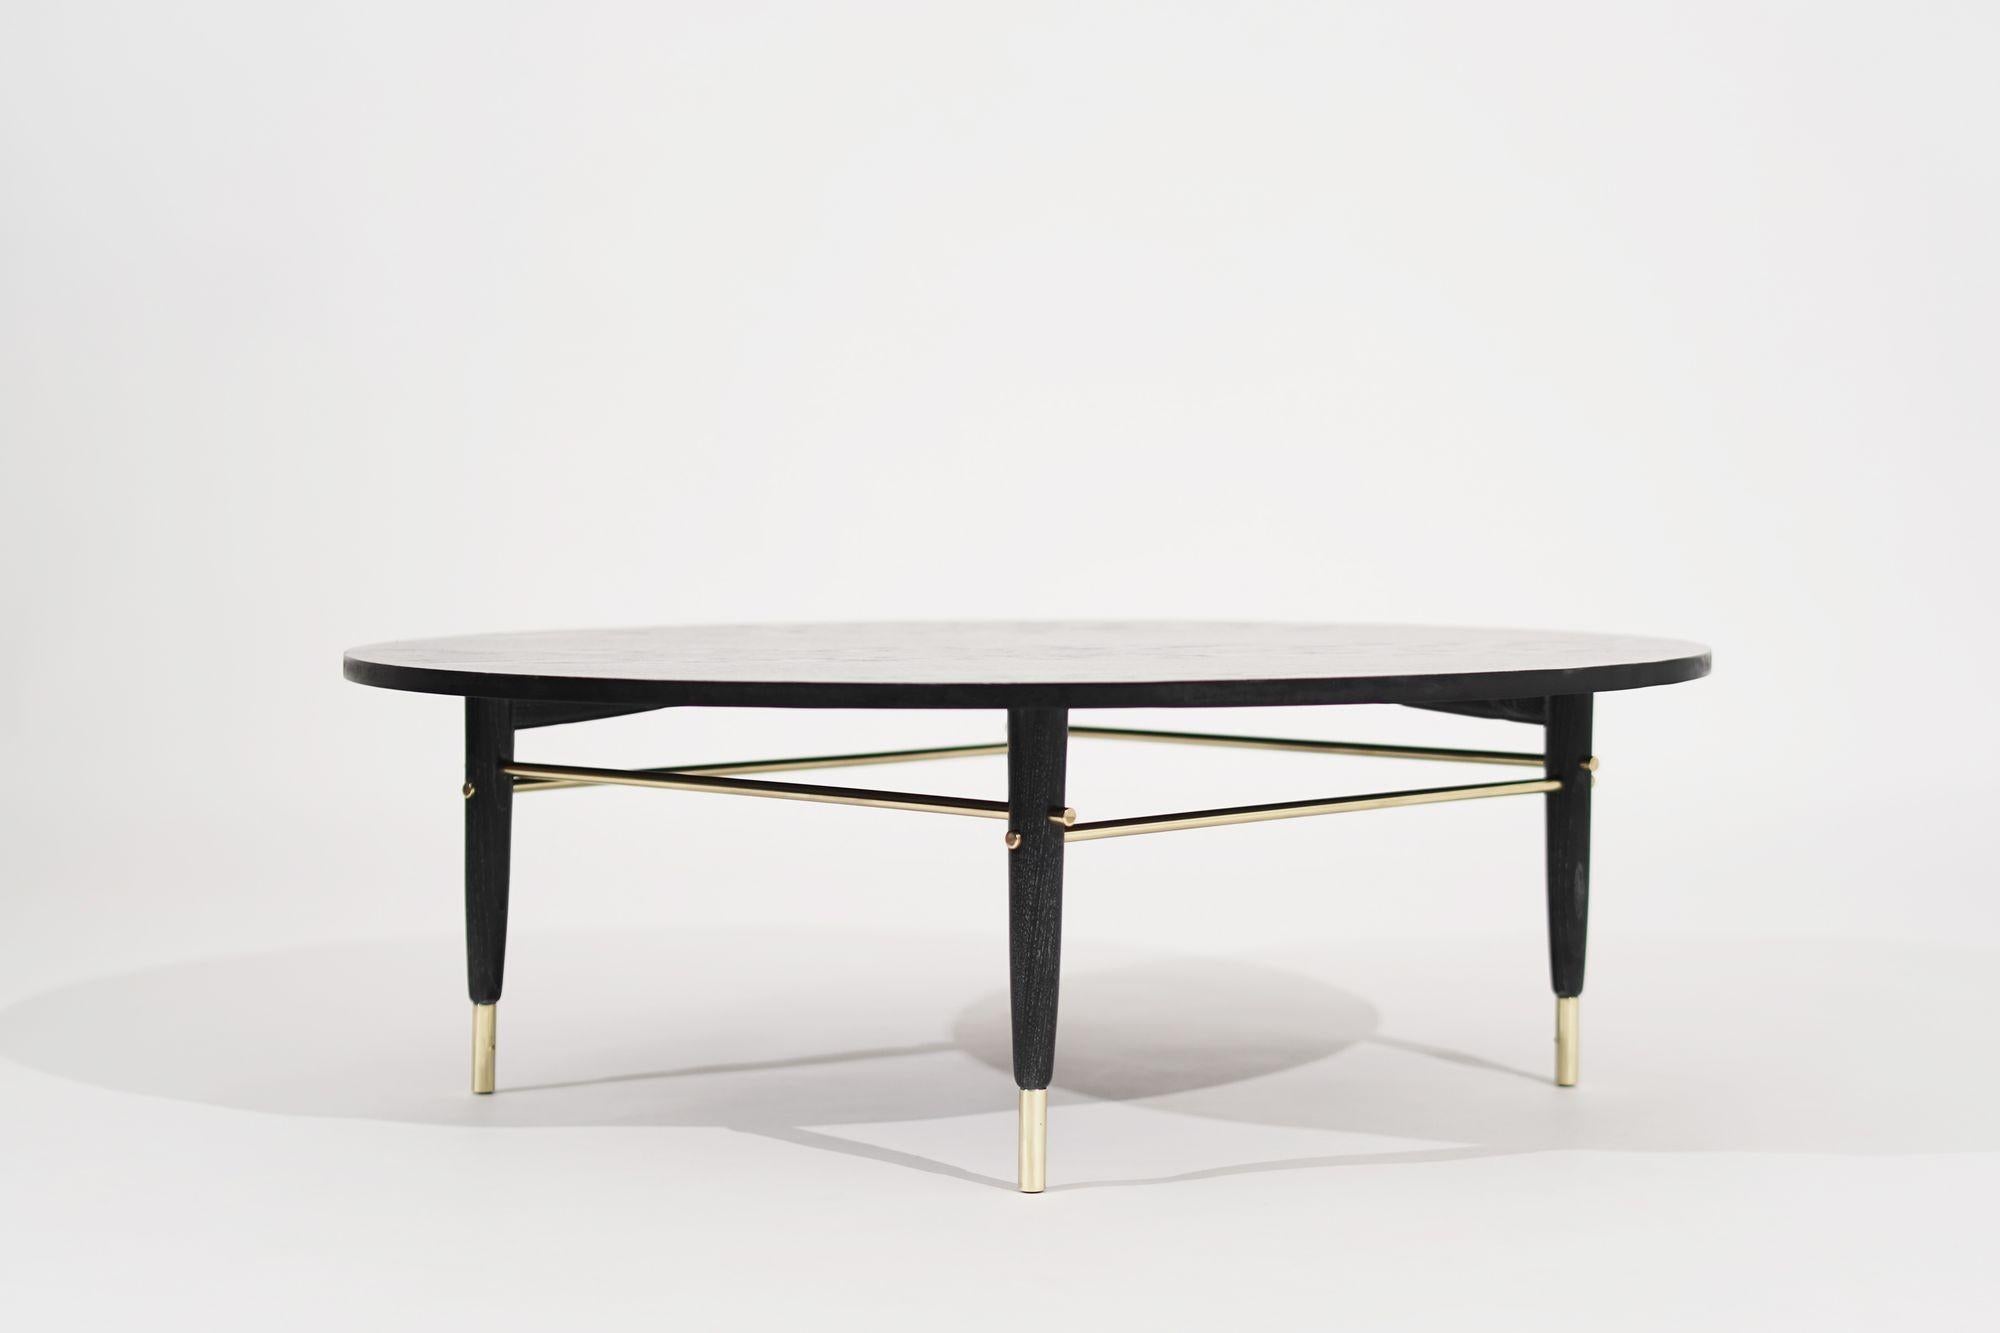 20th Century Brass Accented Coffee Table in Black Ceruse, C. 1950s For Sale